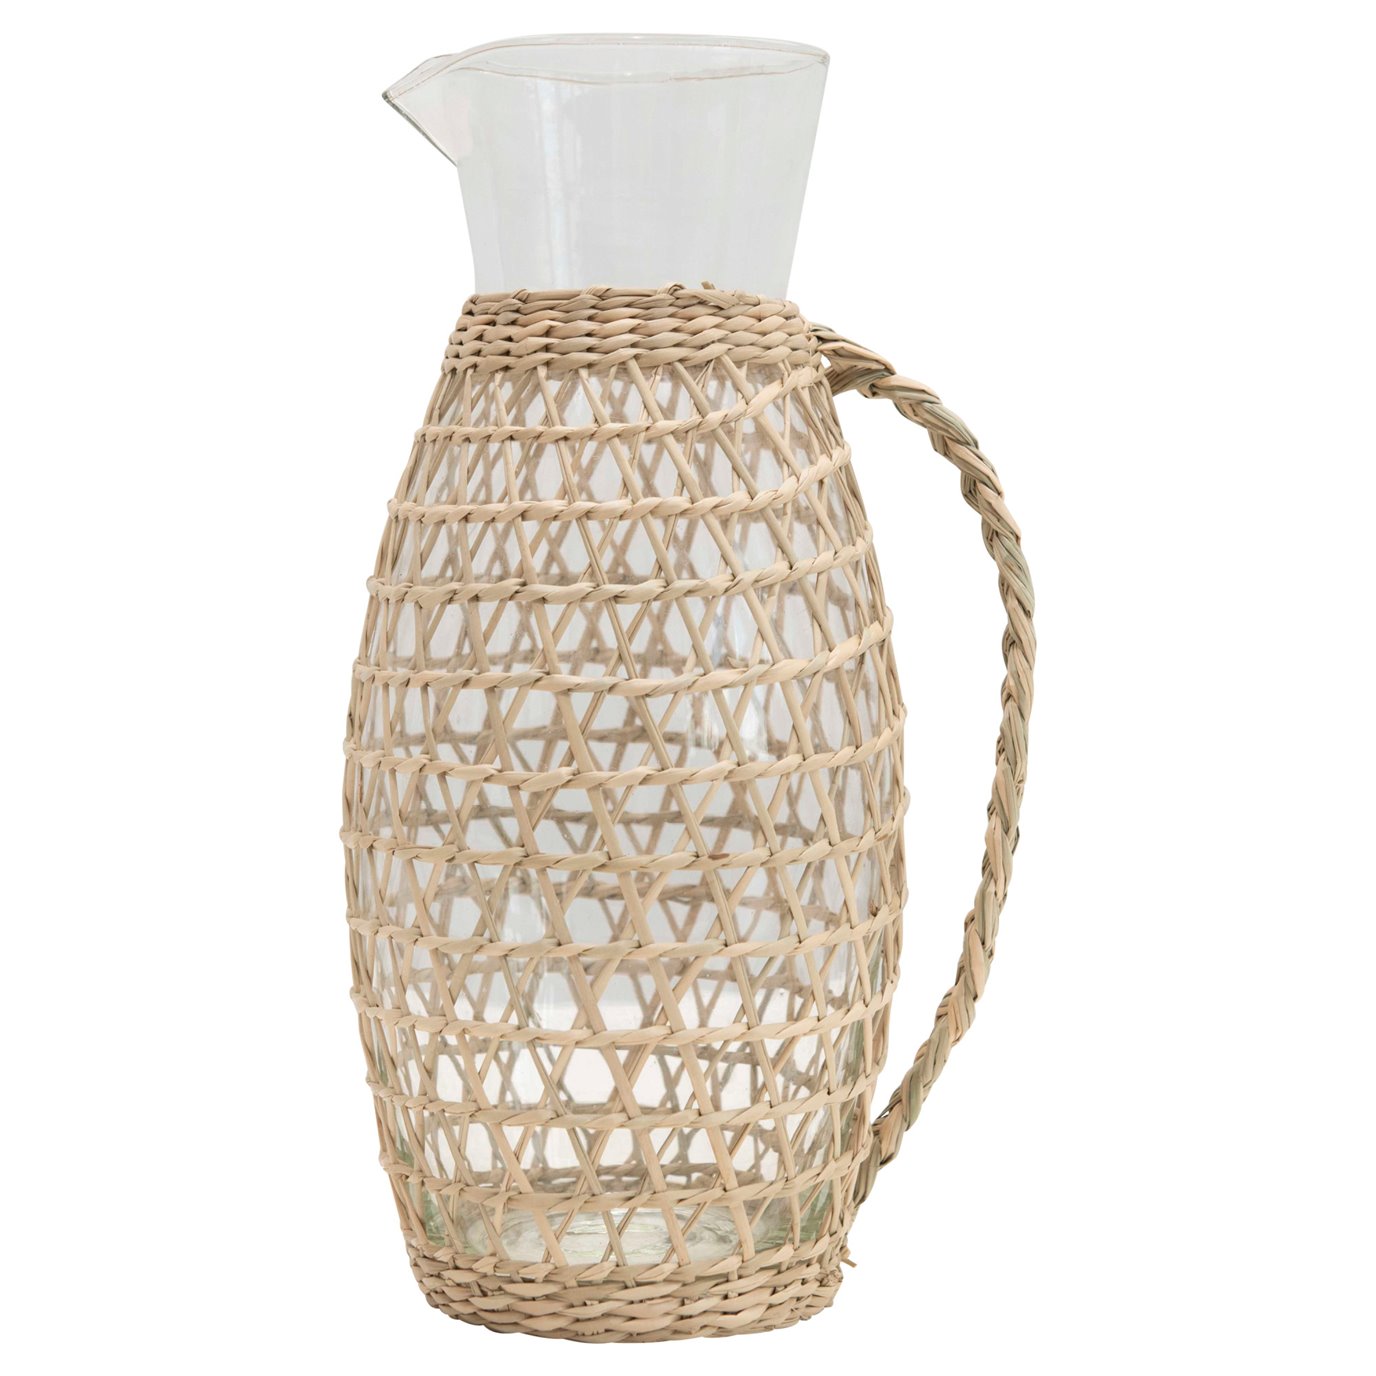 64 oz. Glass Pitcher with Seagrass Weave Jacket & Handle